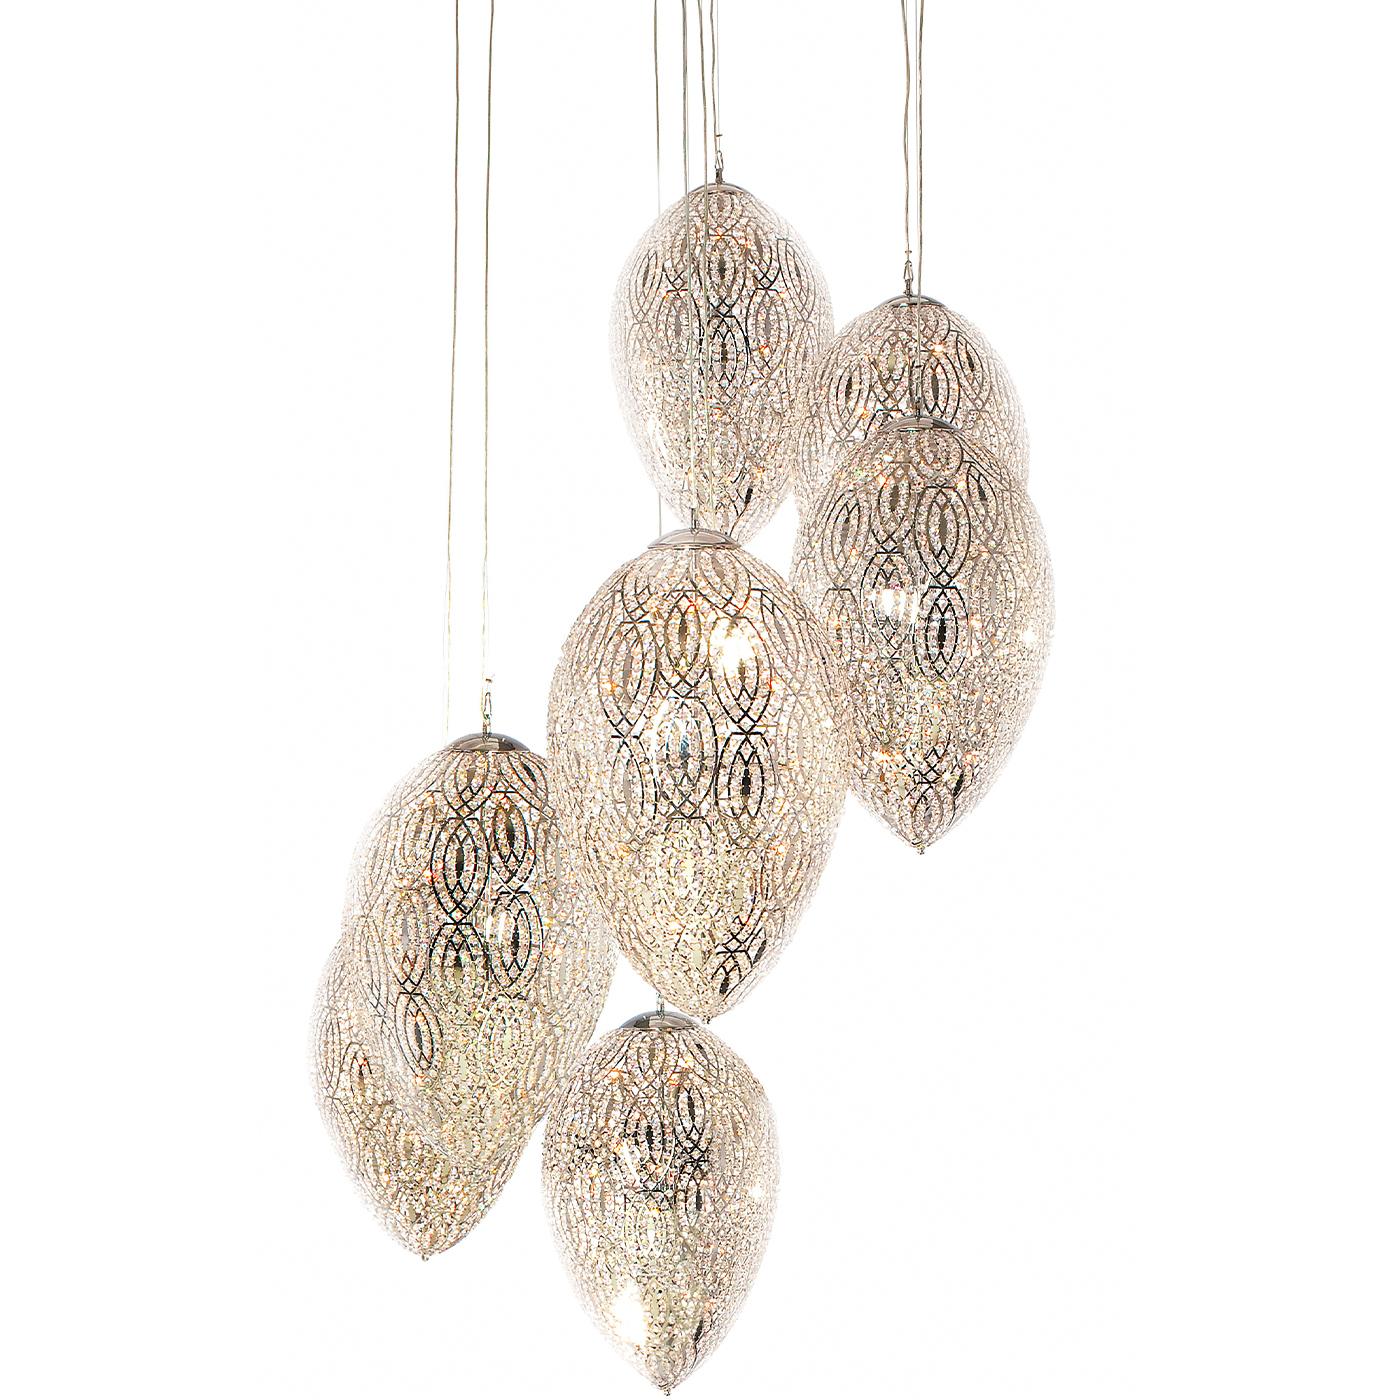 Evoking the mesmerizing stalactites in century-old caves, this pendant lamp creates a dramatic look and captivating ambiance in any interior. Arranged at different heights to form a spiral display, seven egg-shaped elements (each housing a G9 LED)